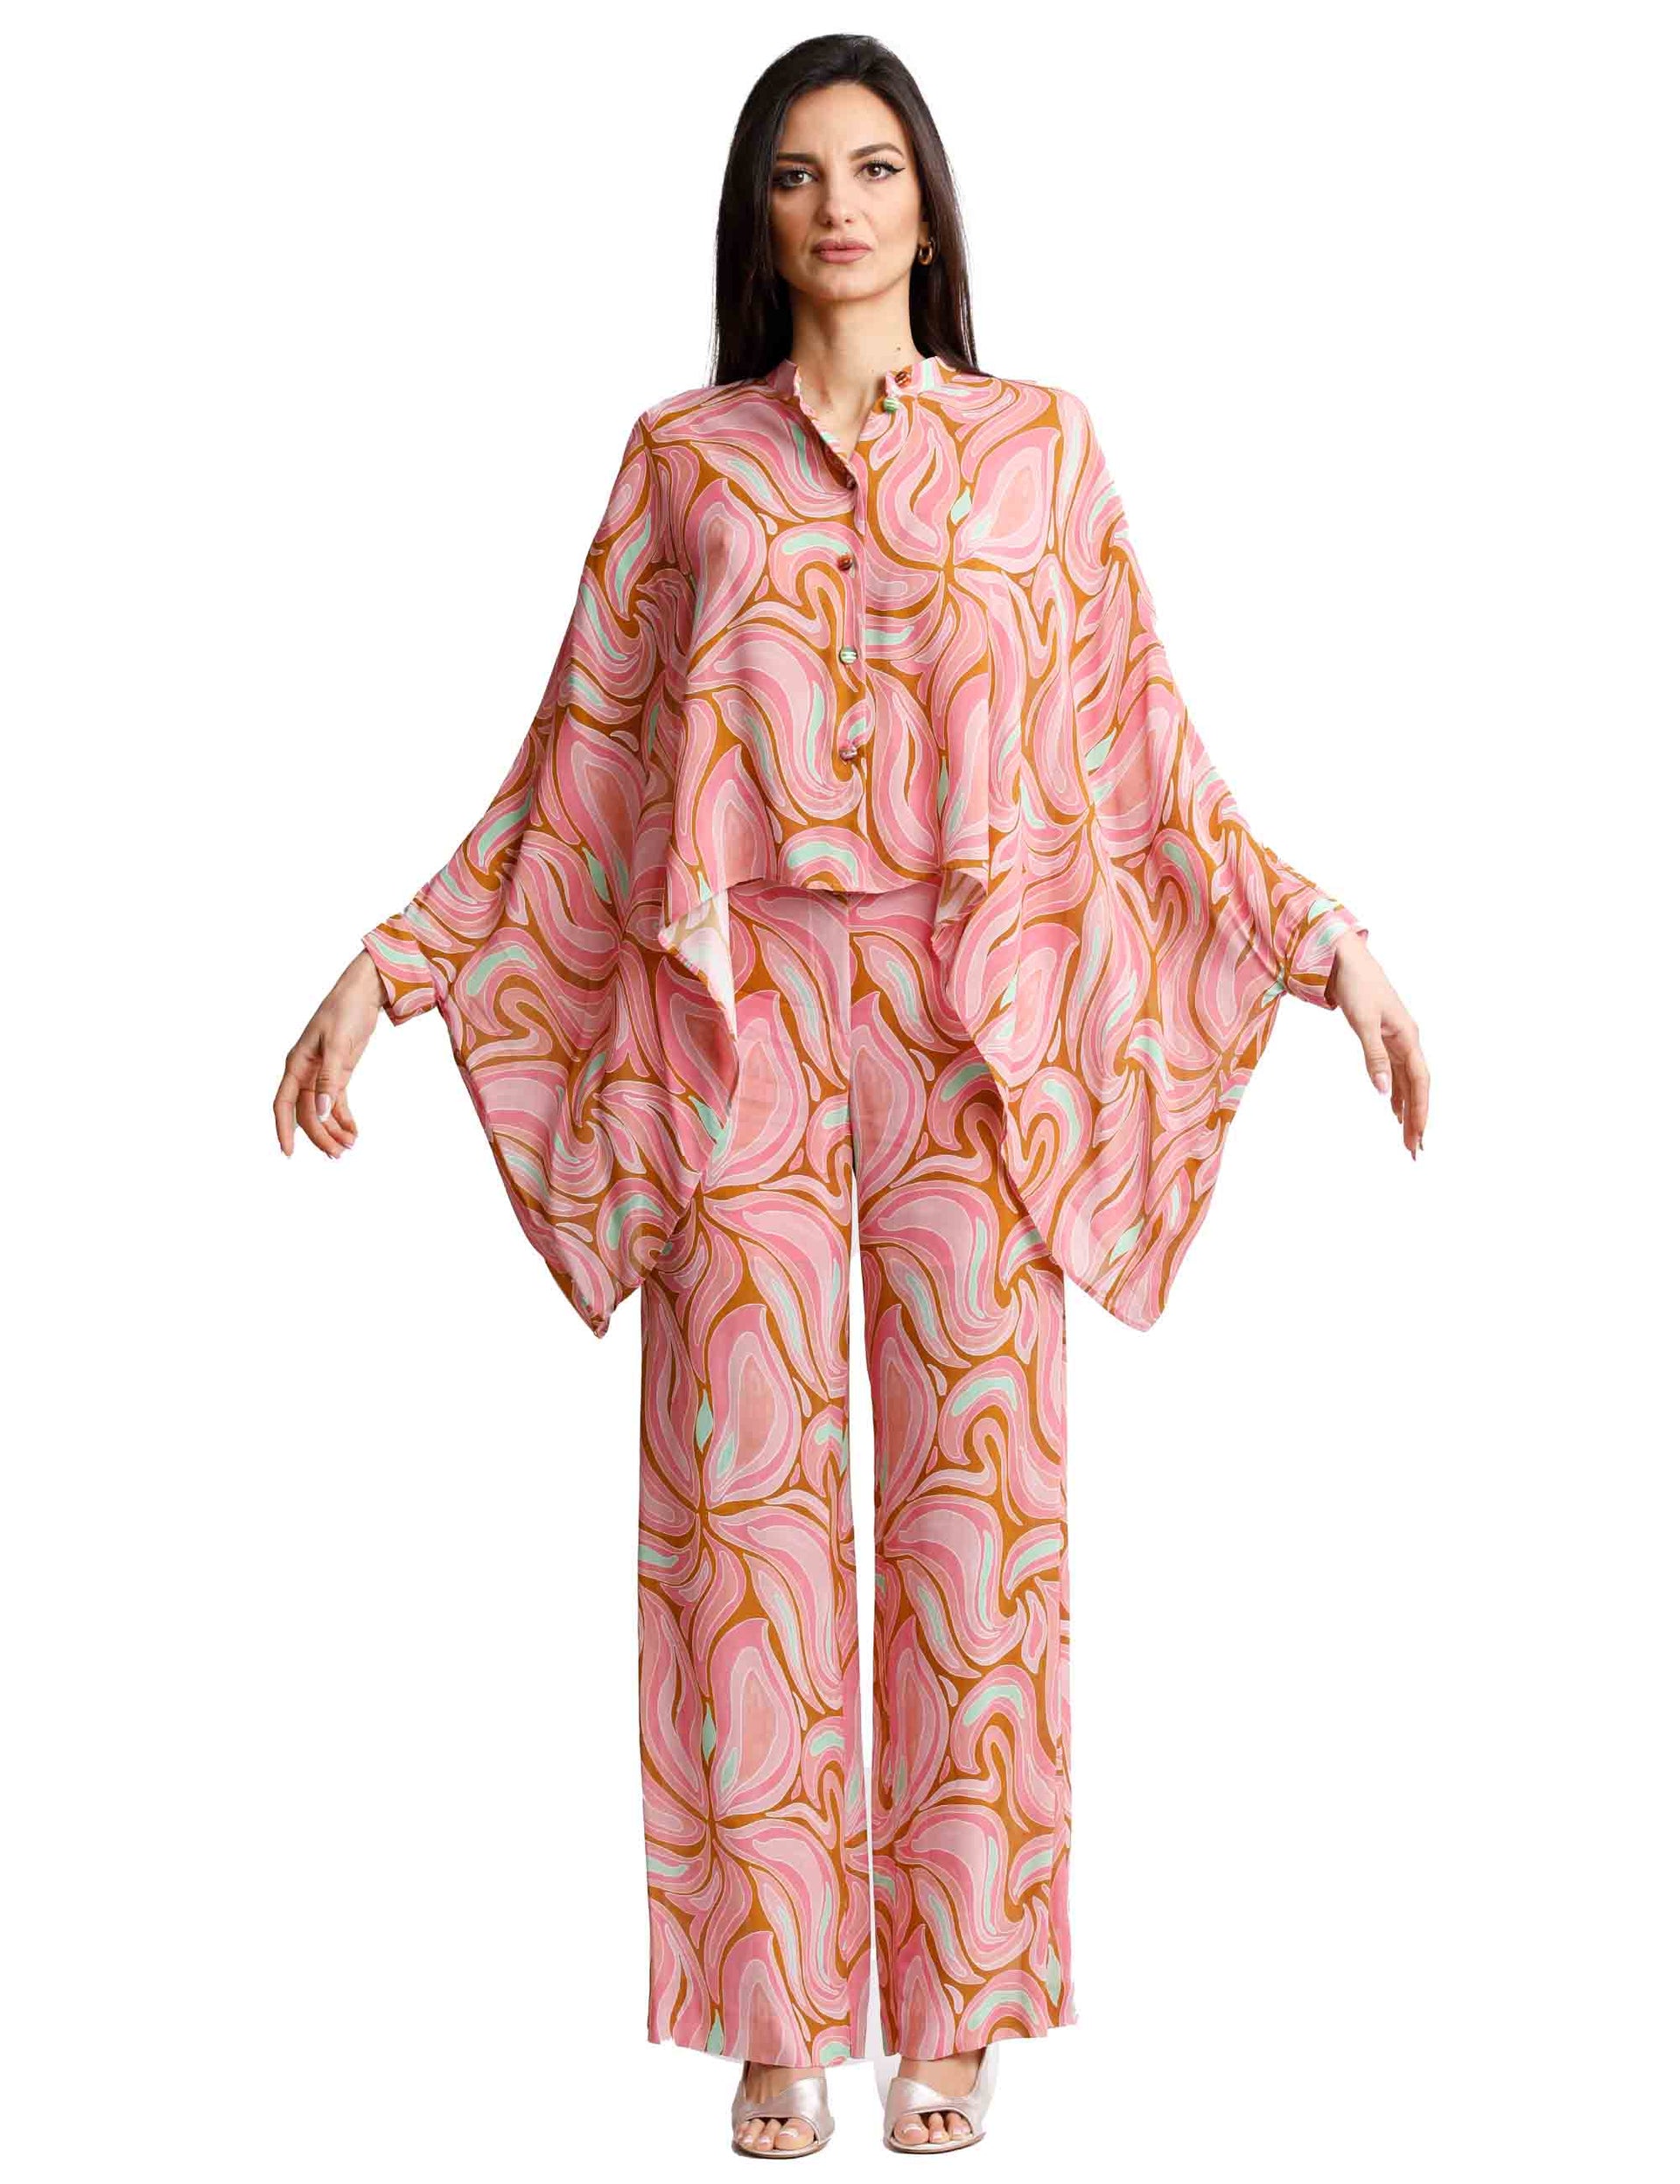 Marble Georgette women's shirts in printed natural pink viscose